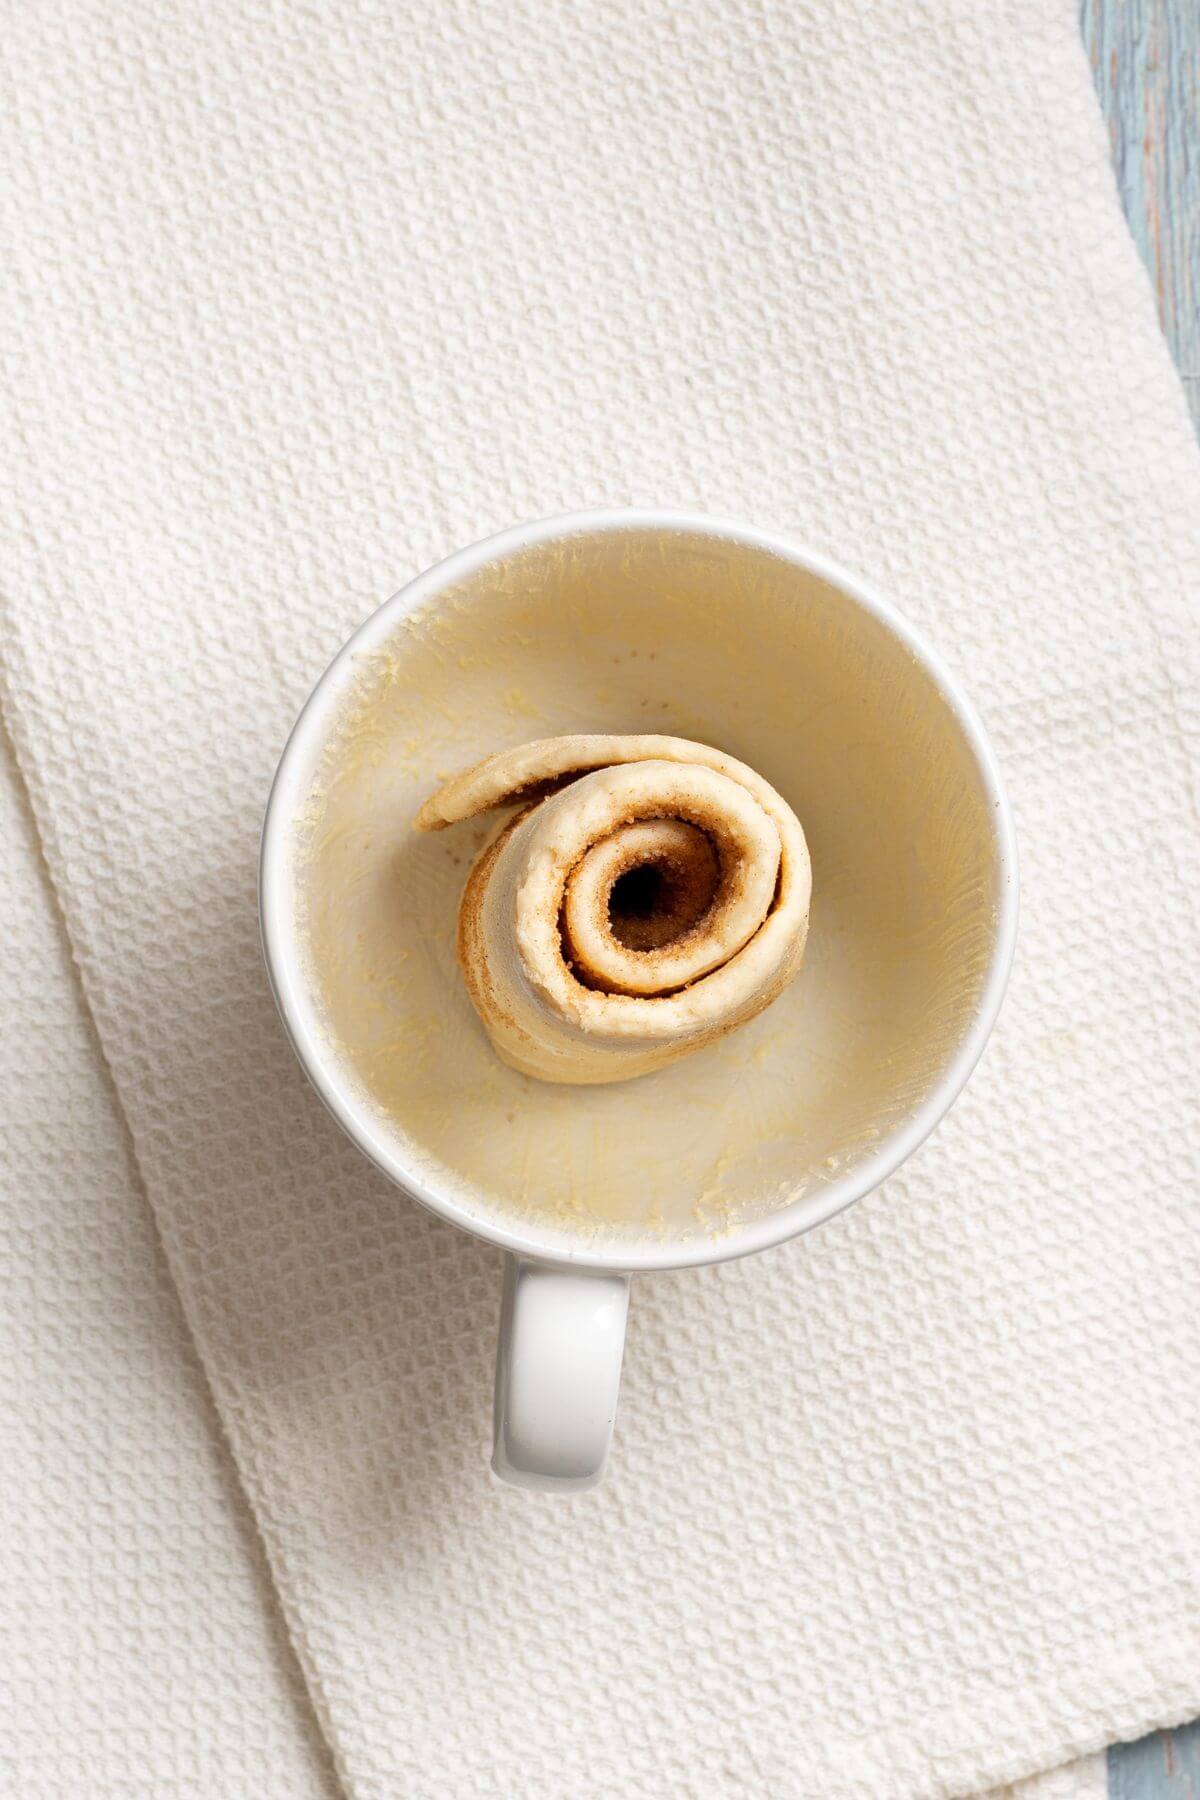 Unbaked cinnamon roll in coffee cup.